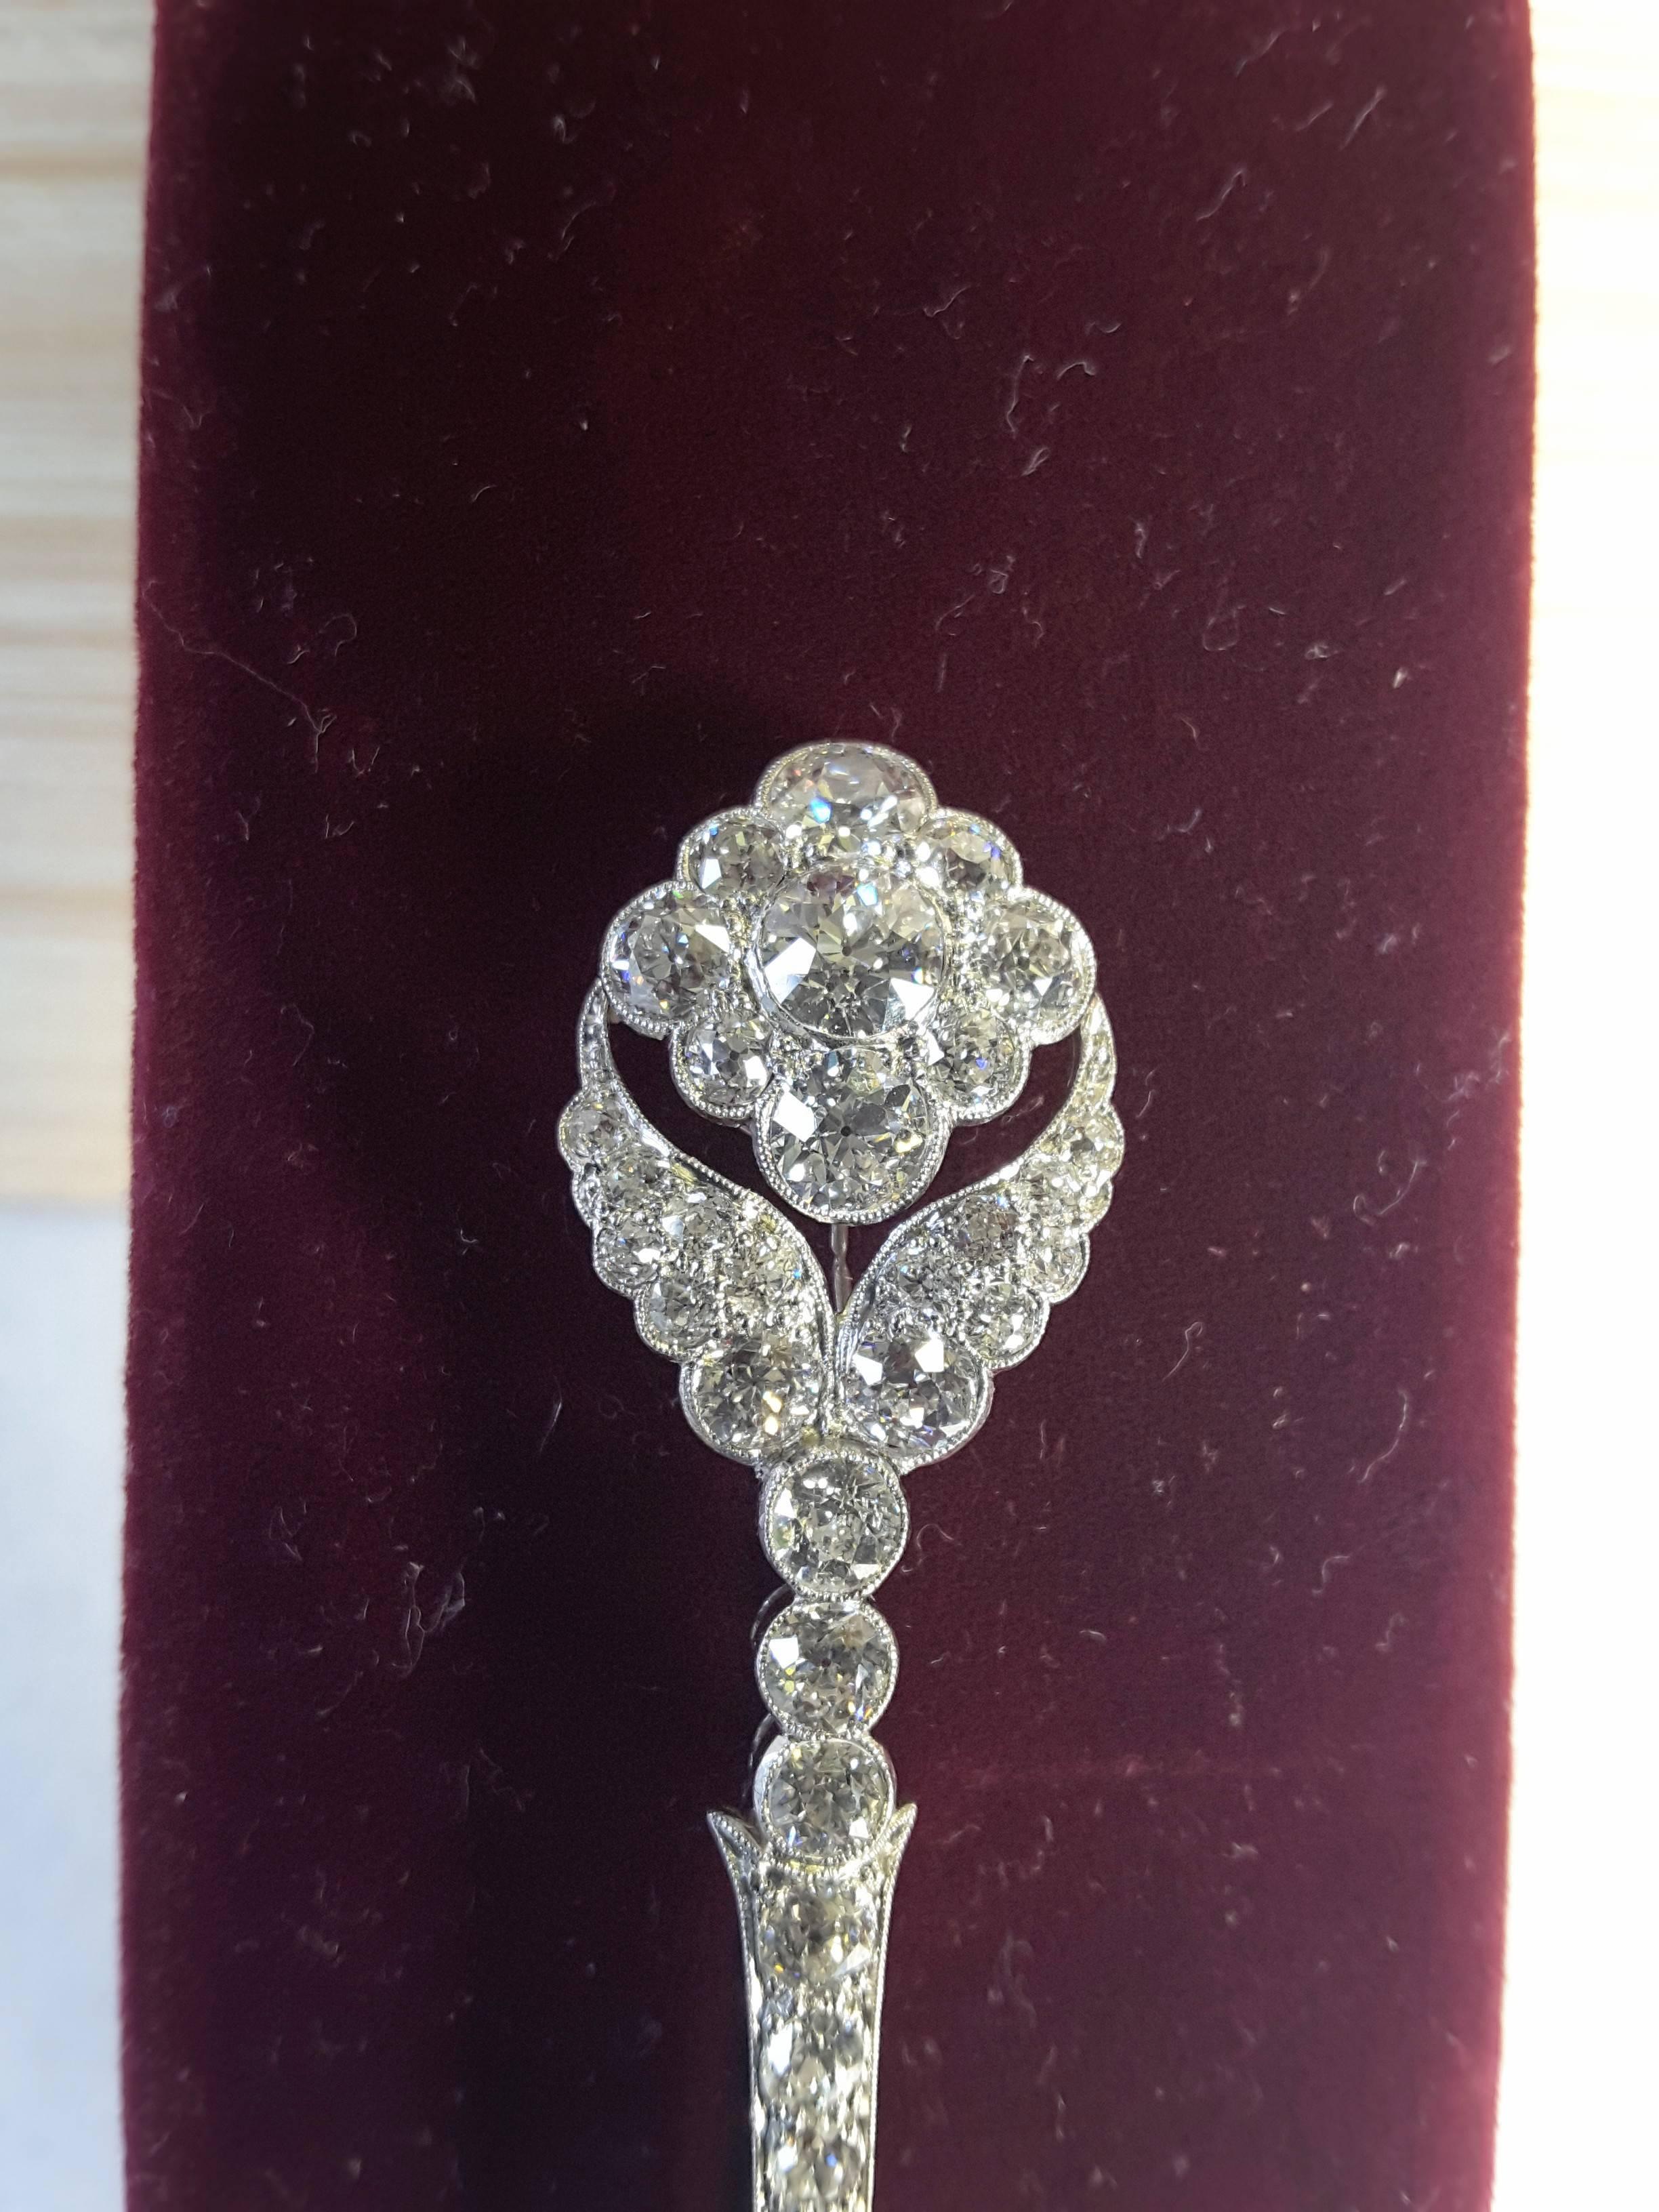 Art Deco 5.07 carat diamond and platinum pin or brooch, this exceptional pin/brooch is done with platinum & diamonds of stunning size and quality, I have included a picture of the apprasial for reference on the description, diamond grading, color